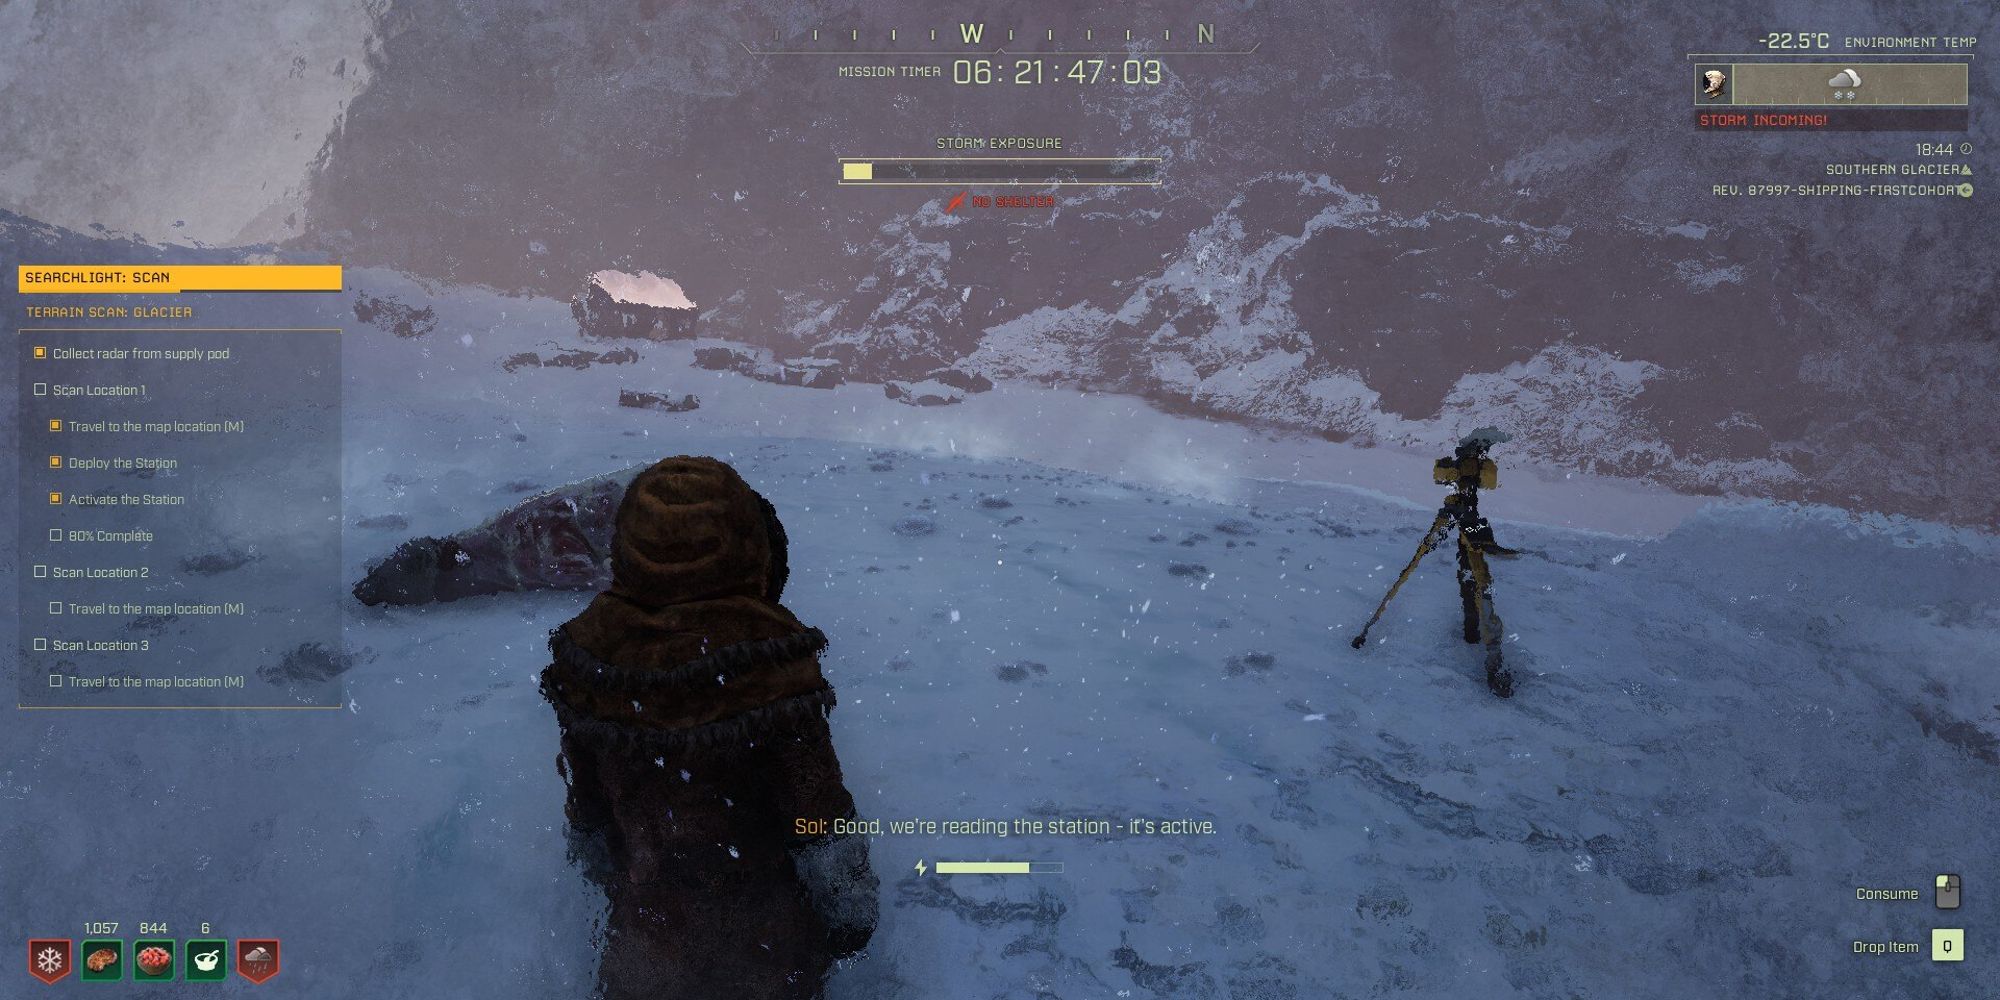 player setting up a radar during a snowstorm